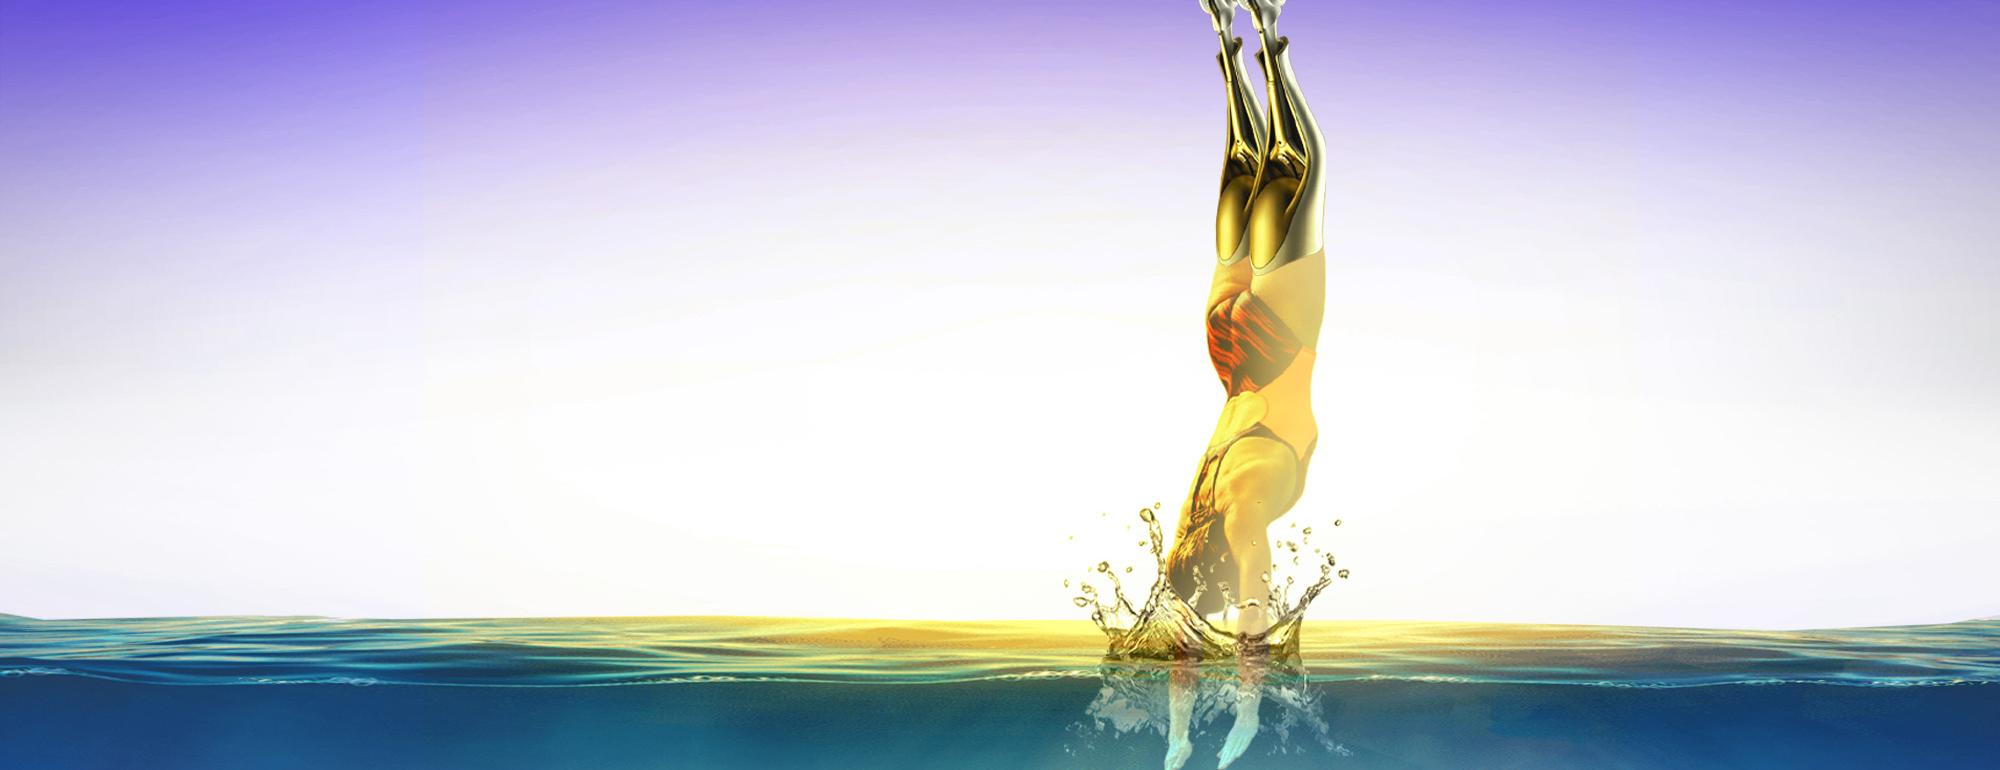 Graphic design of a diver with prosthetic legs diving into an ocean that is shown in a cutaway view.  the background is purplish and bluish with yellow white sunlight behind the driver. 